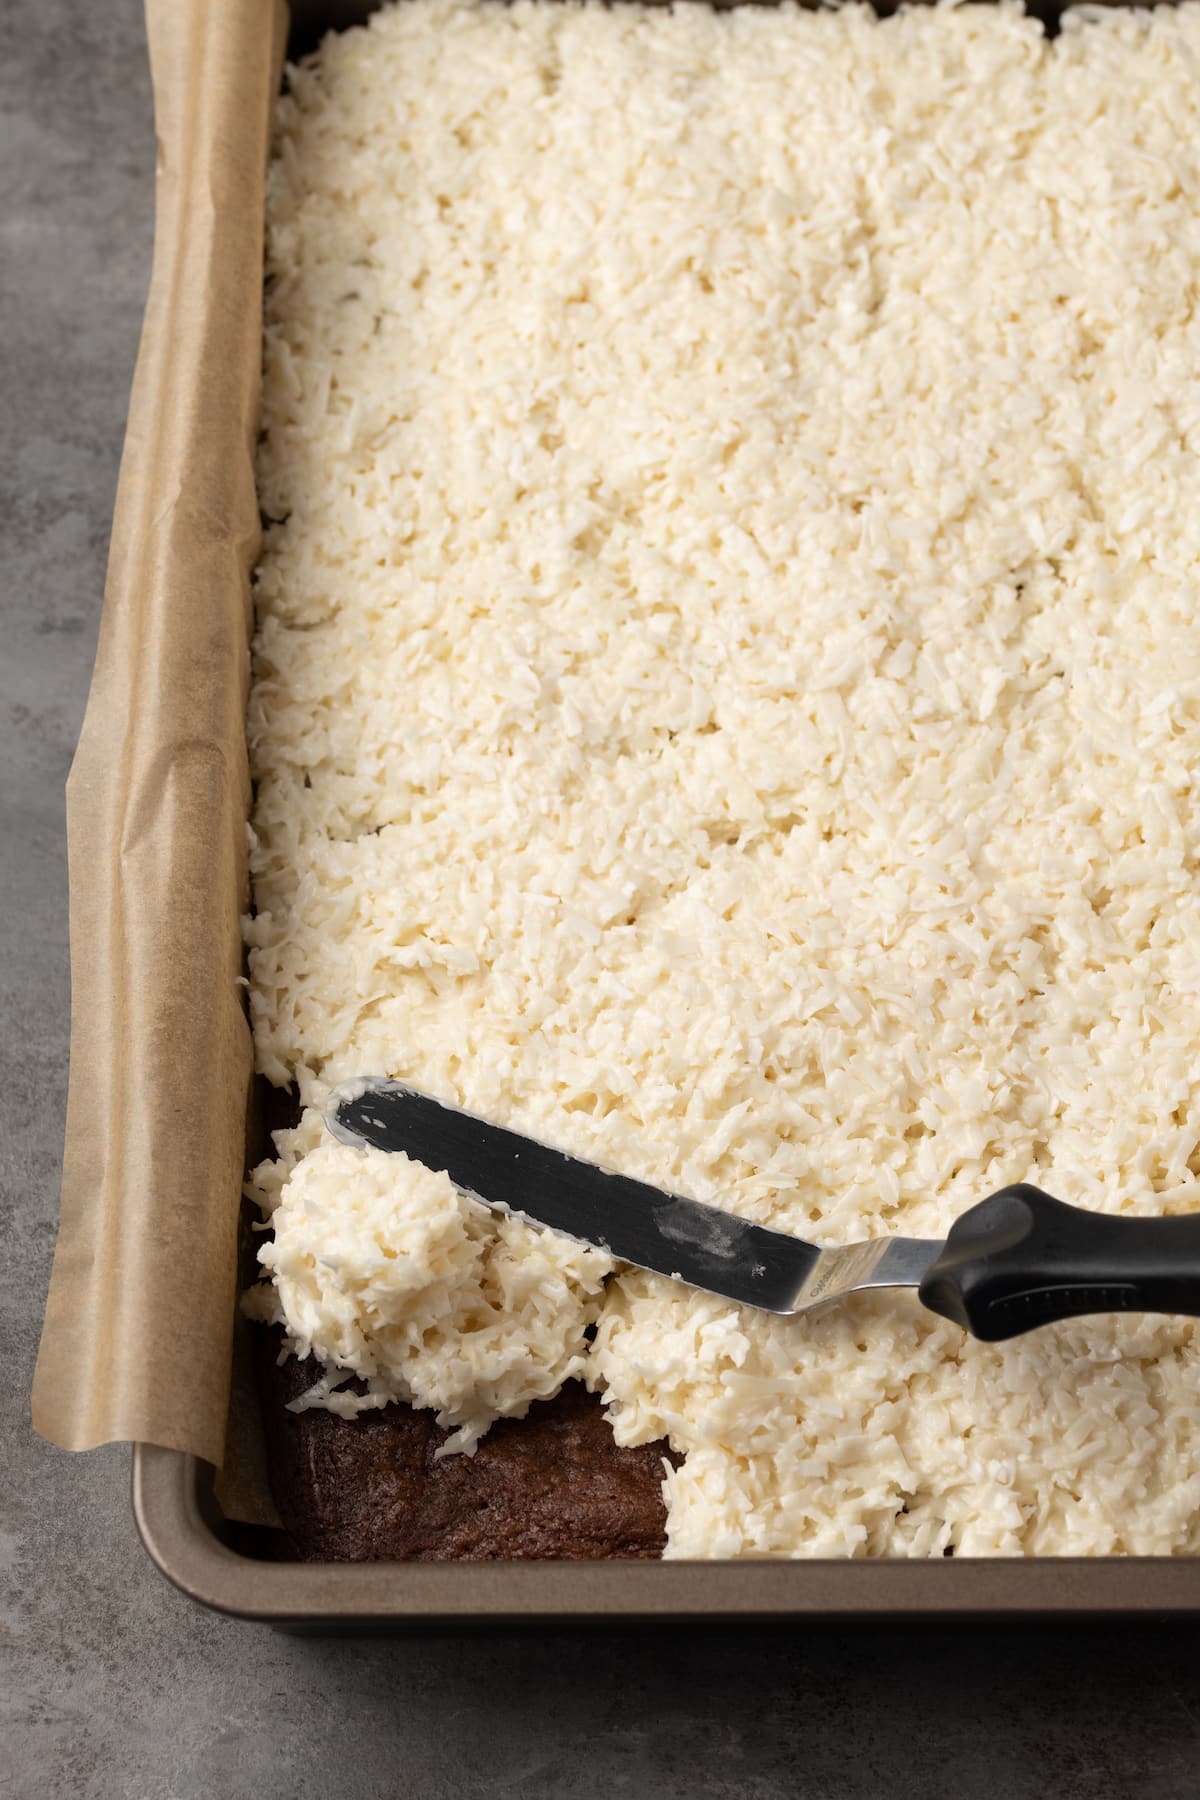 An offset spatula spreads the coconut layer over the brownies in a parchment-lined baking pan.